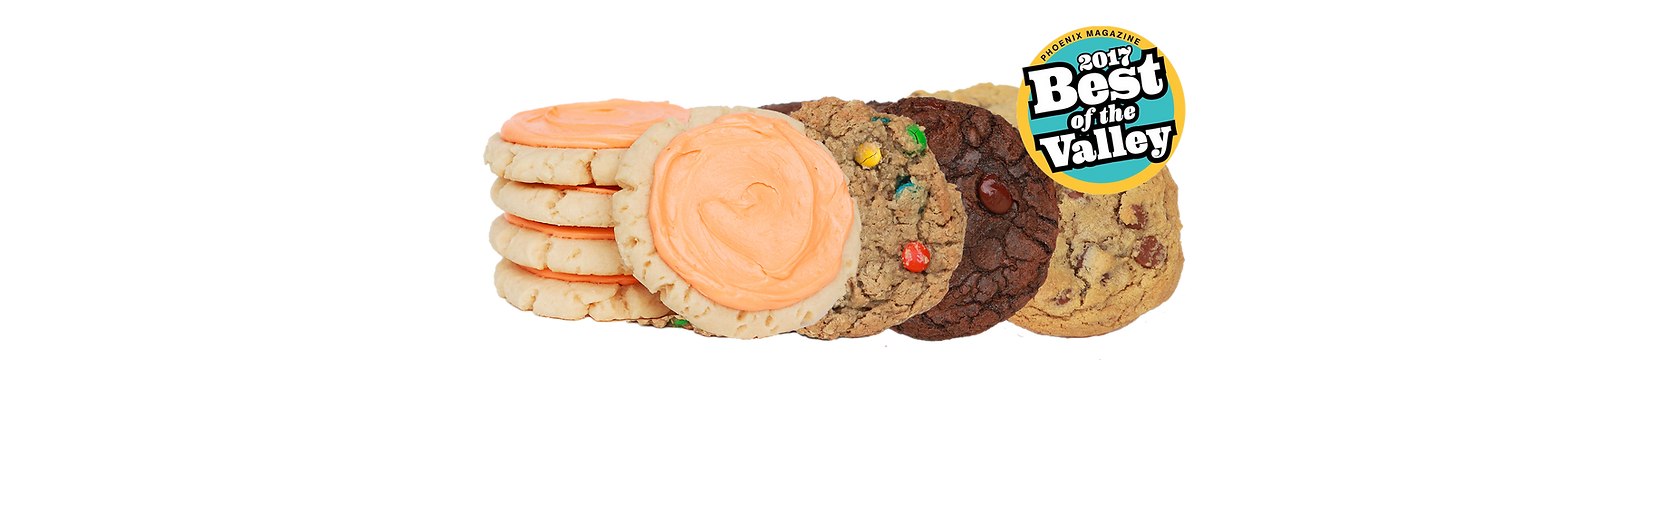 Best Cookie of The Valley